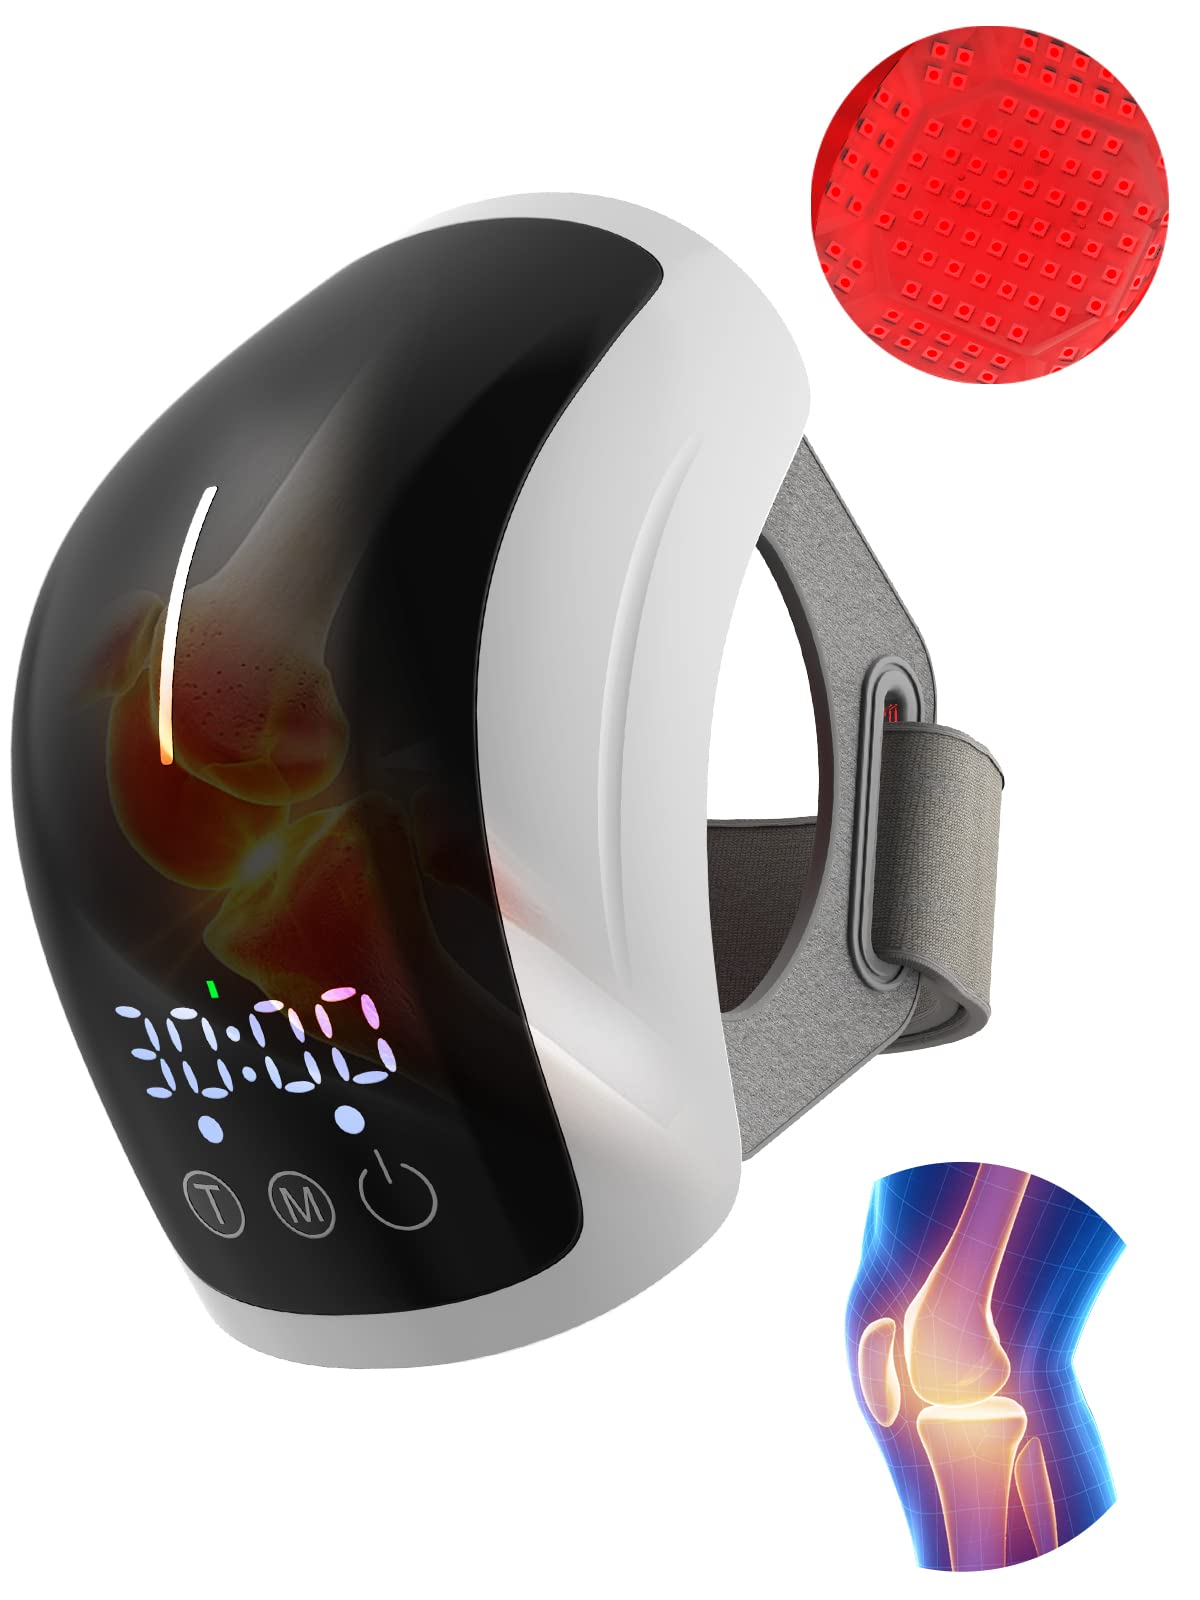 iKeener Red Light Therapy for Swelling Stiff Joints Stretched Ligaments and Muscles Injuries, Infrared Pulsed laser Therapy Knee Brace for Pain Relief Deep Arthritis Tissue